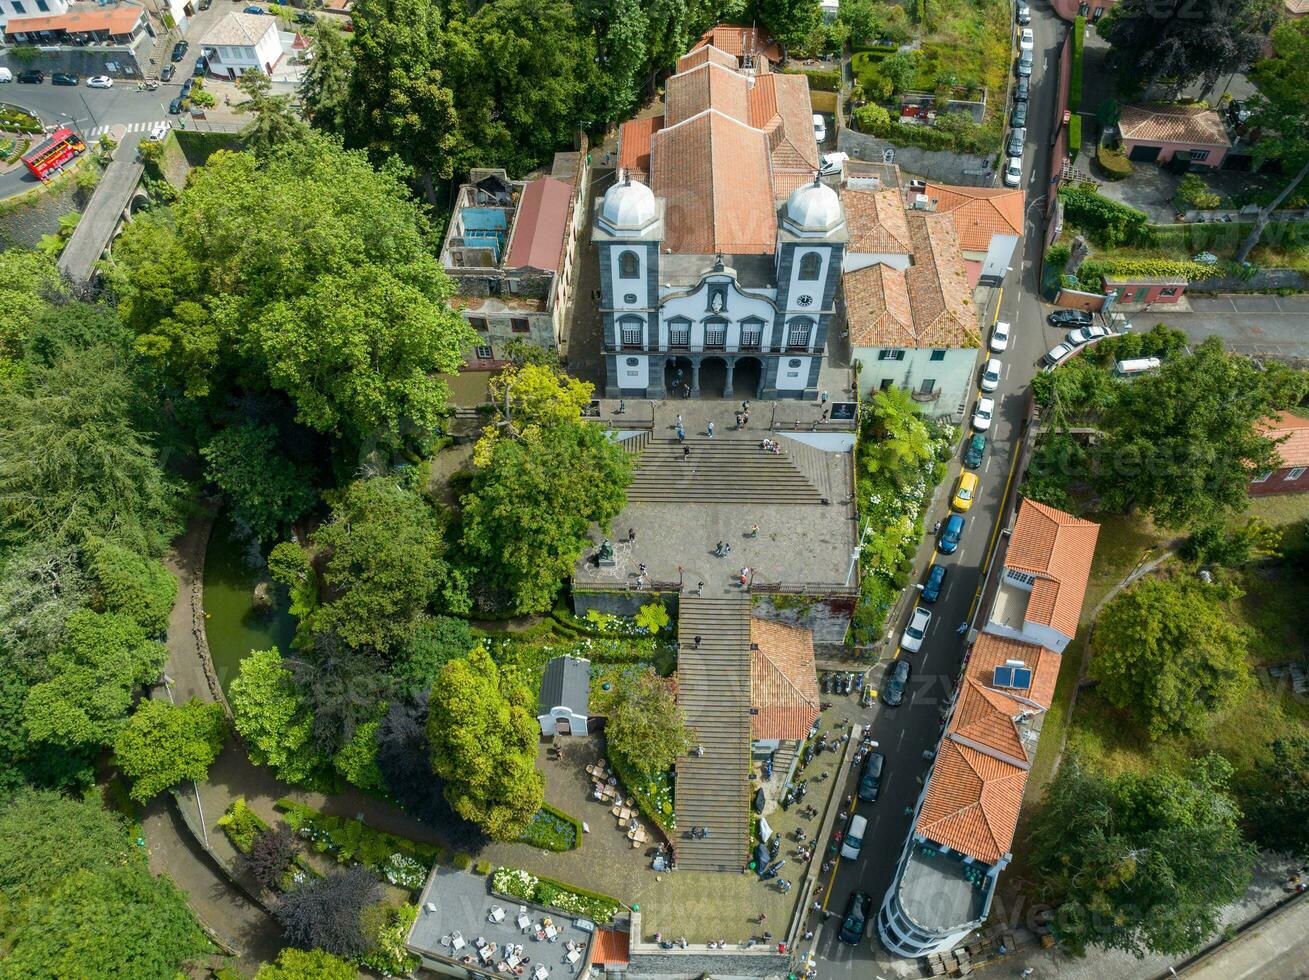 Church of Lady of Monte -  Funchal, Portugal photo